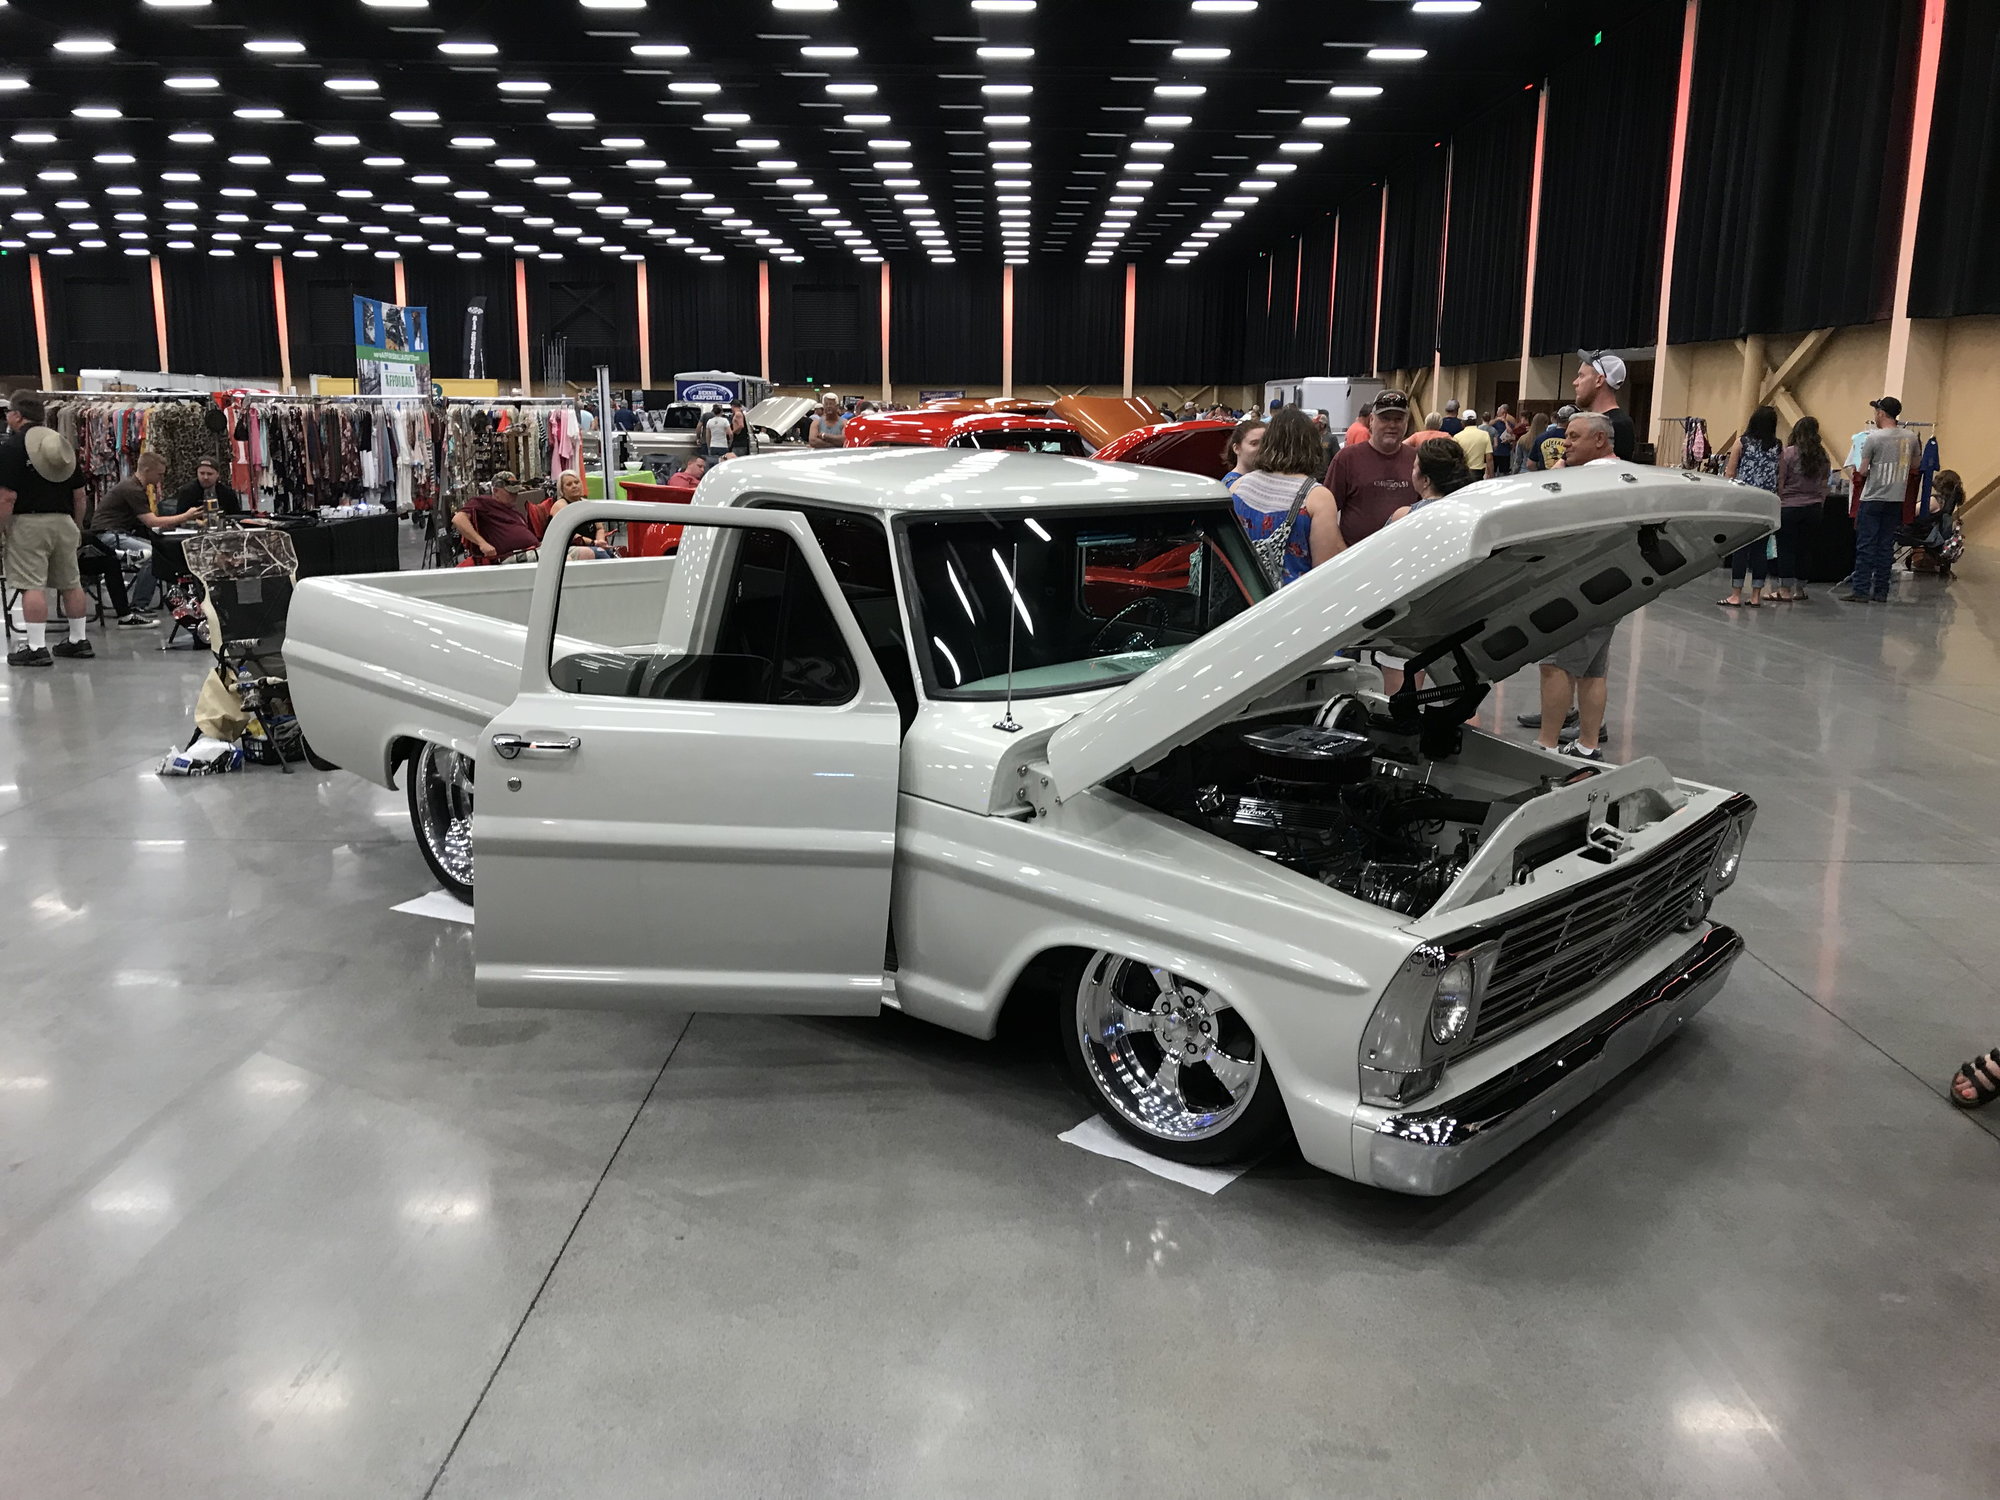 F100 Grand National Show at Pigeon Ford Truck Enthusiasts Forums